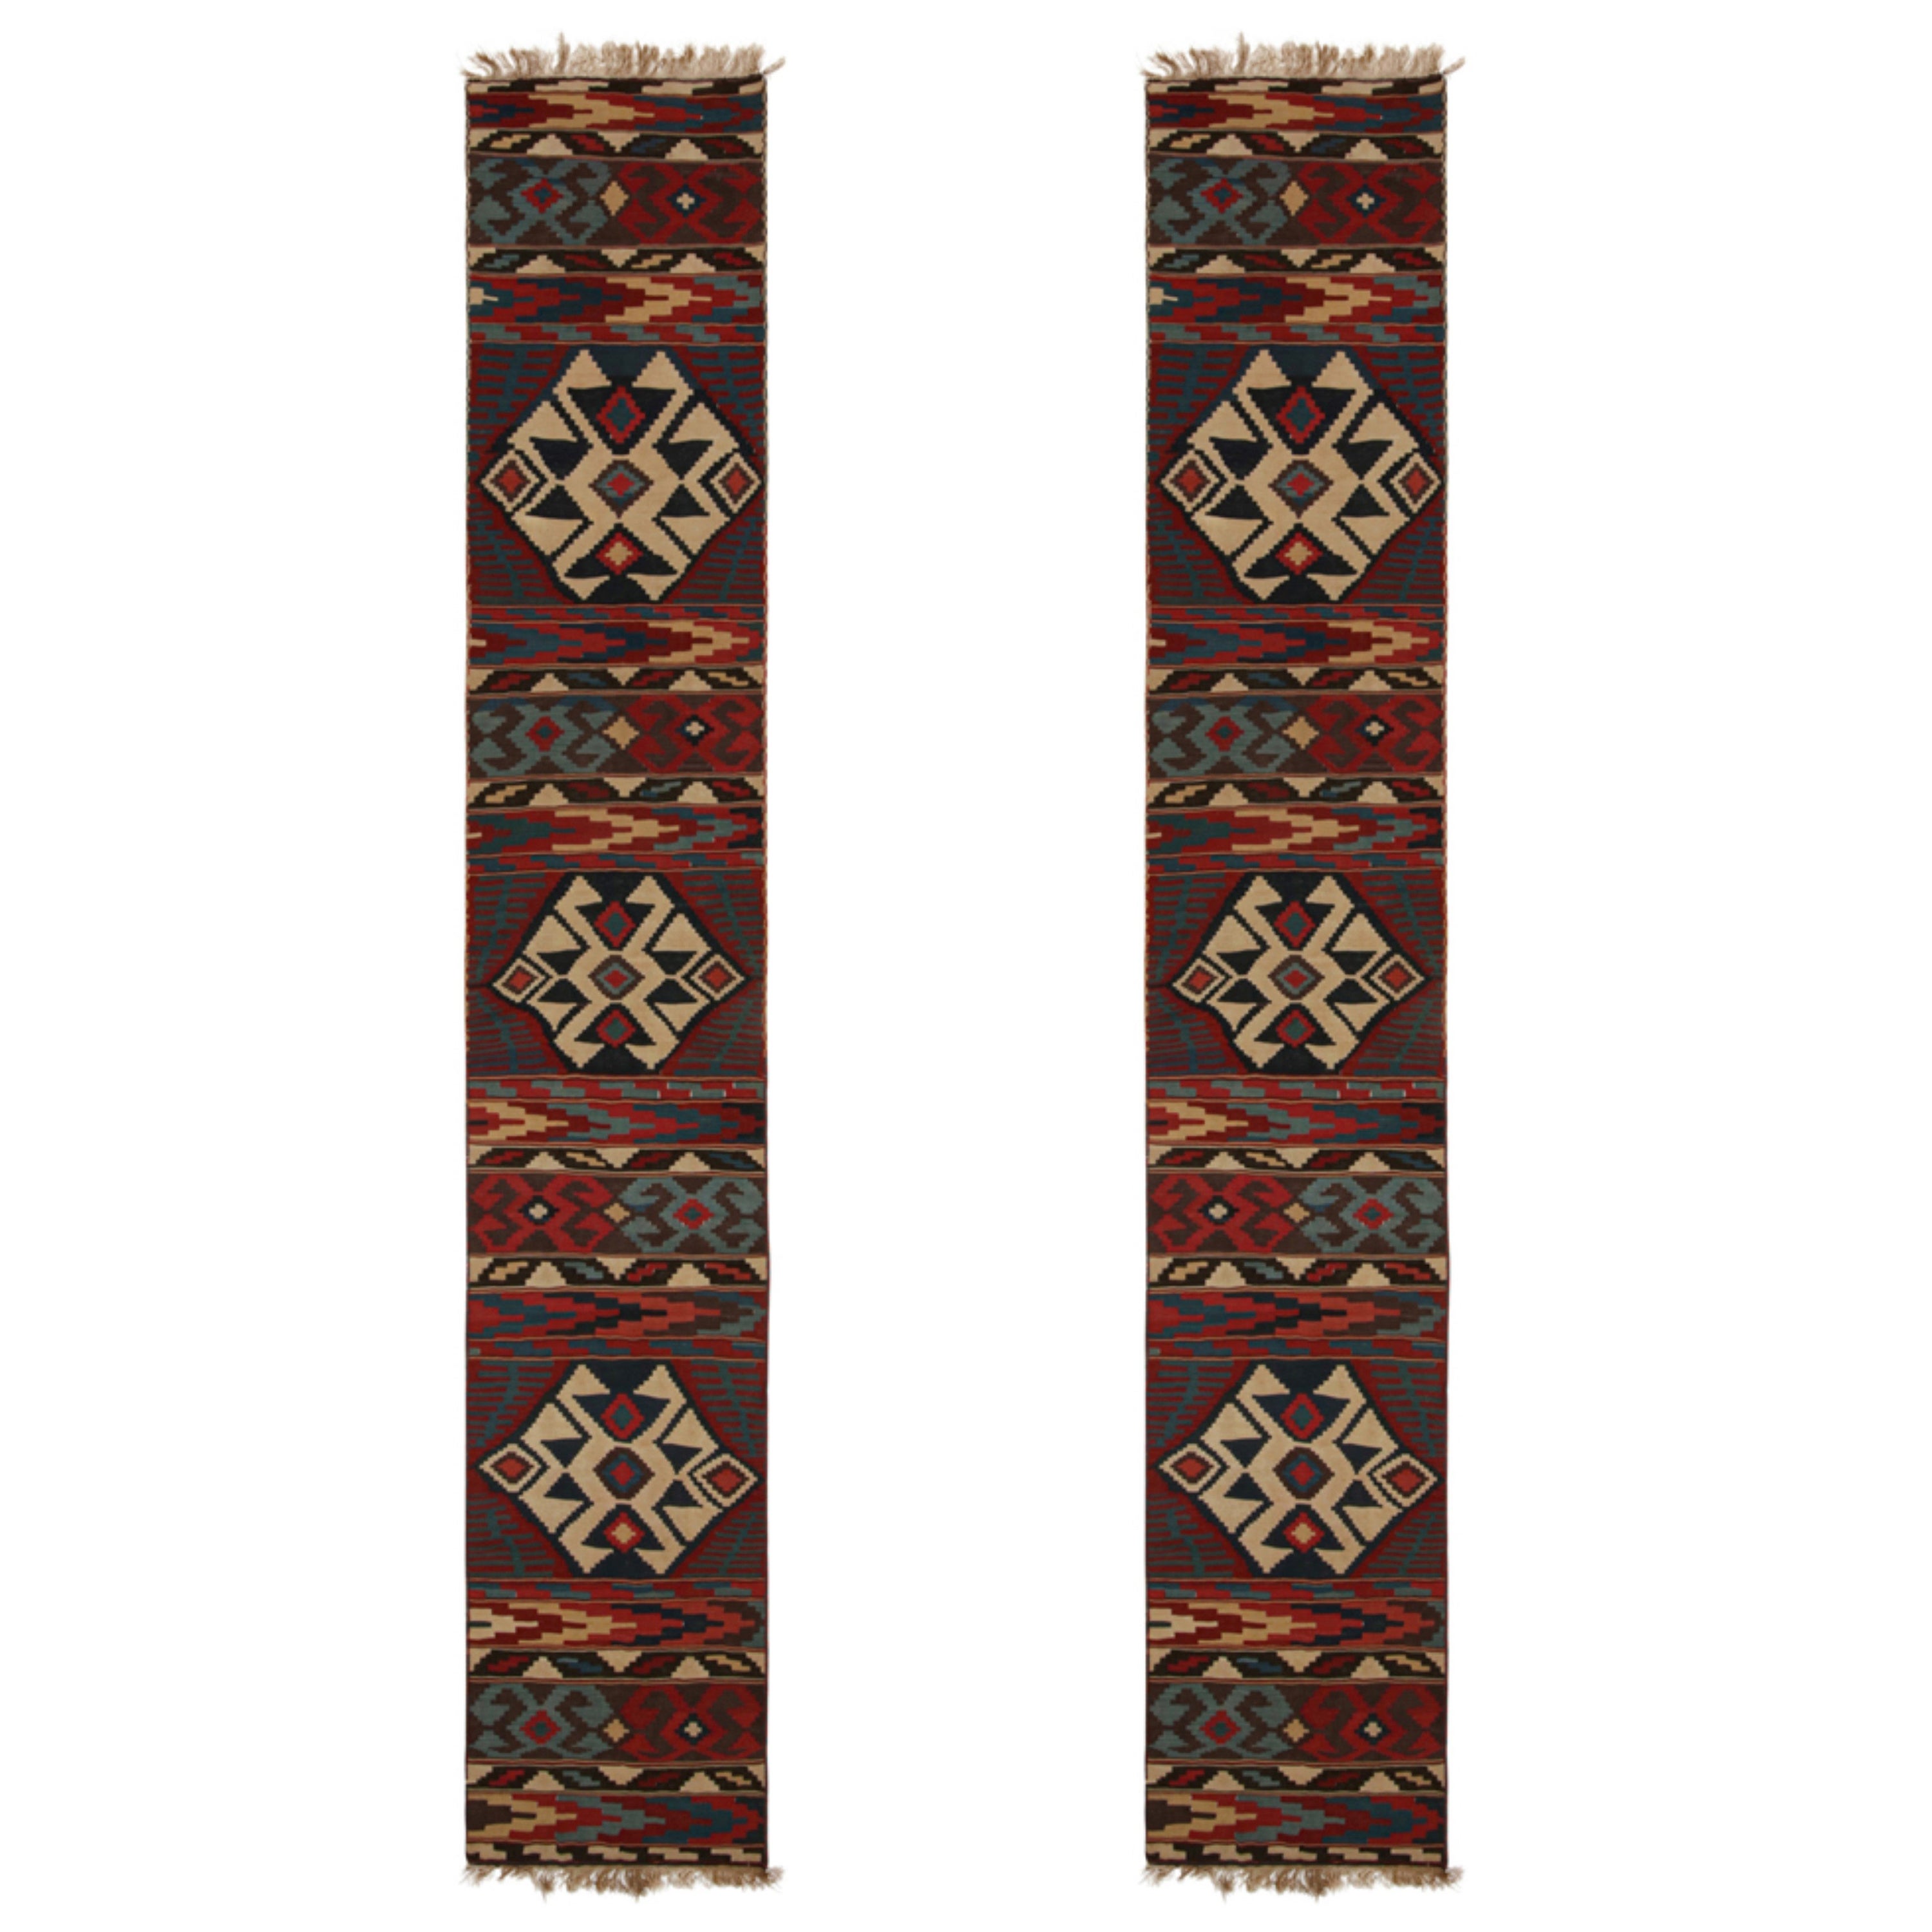 Twin Vintage Persian Kilim Runner Rugs with Geometric Patterns For Sale